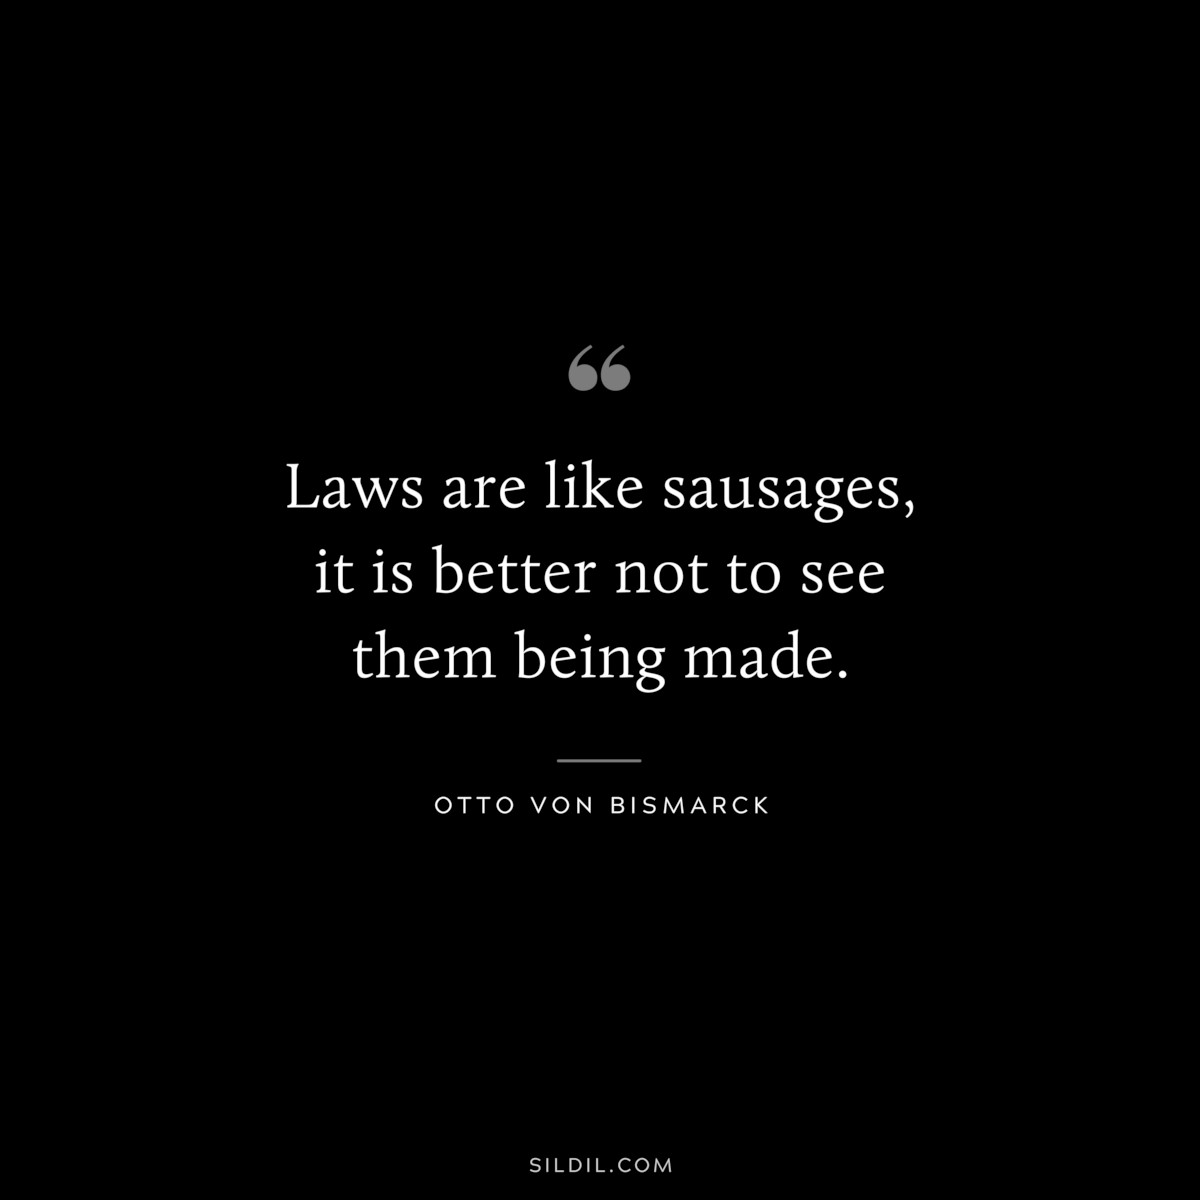 Laws are like sausages, it is better not to see them being made. ― Otto von Bismarck